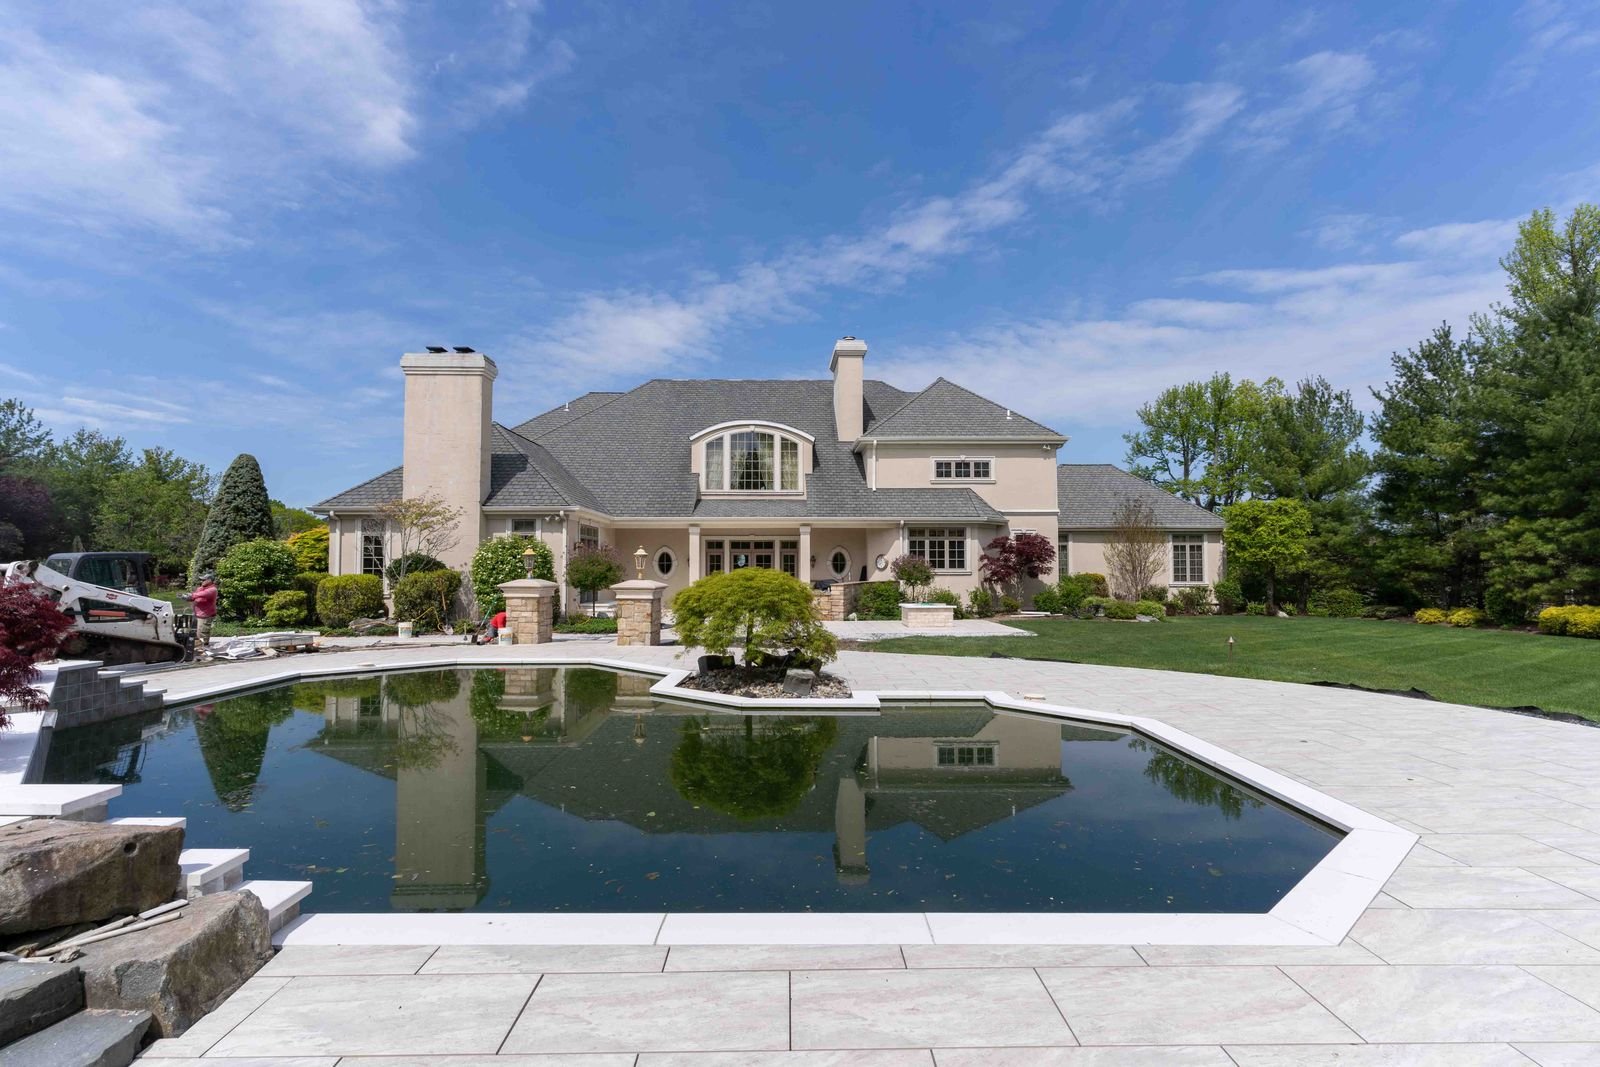 Personal Oasis in Cresskill, NJ